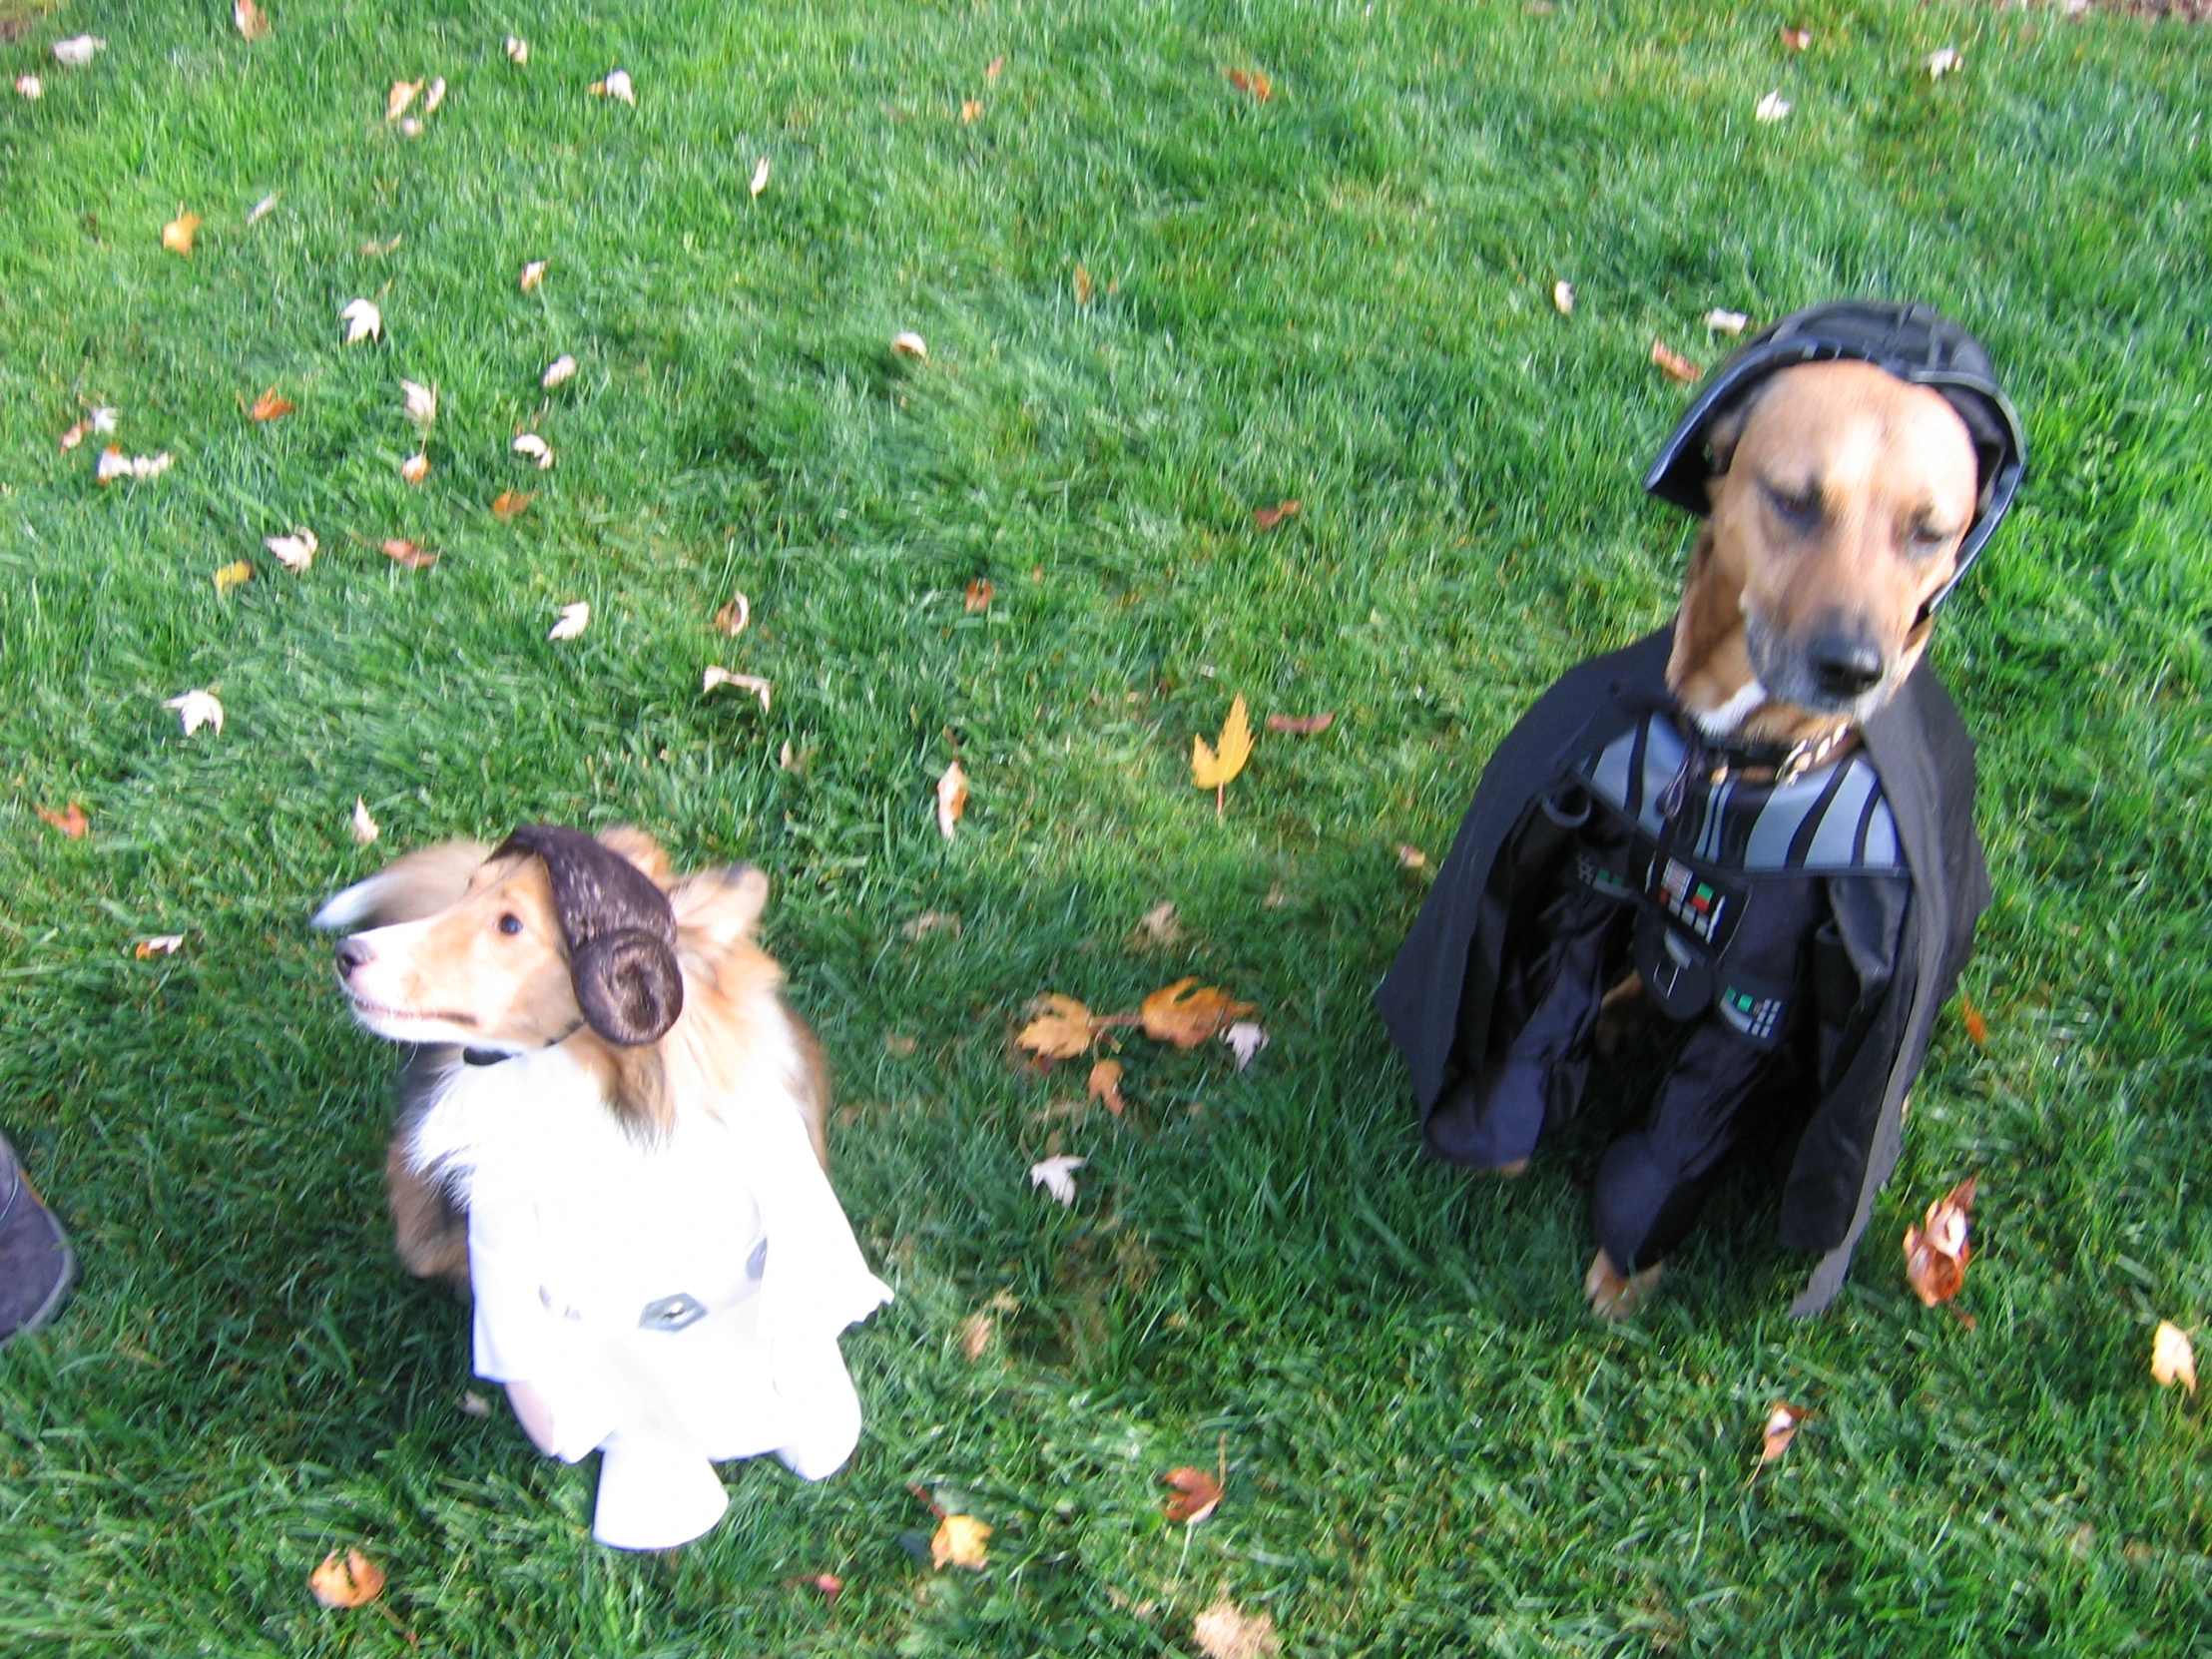 two dogs sitting in the grass together and one wearing a costume